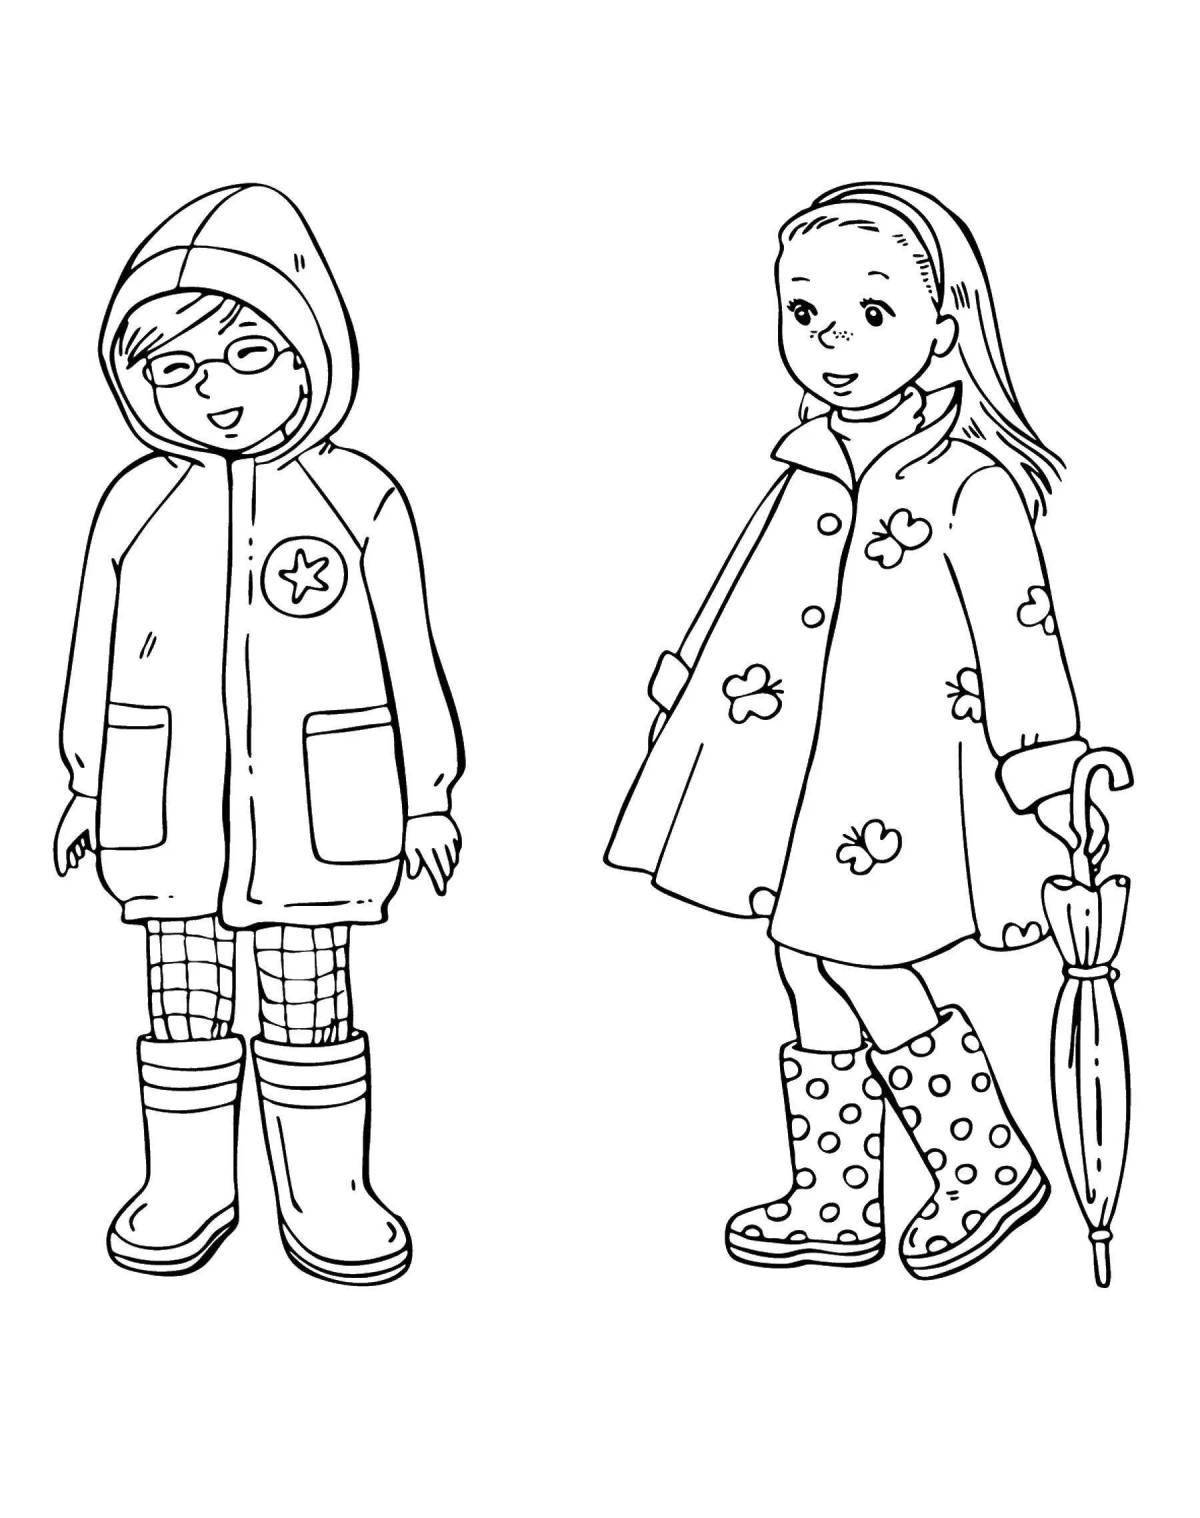 Cute coloring book for children's winter clothes